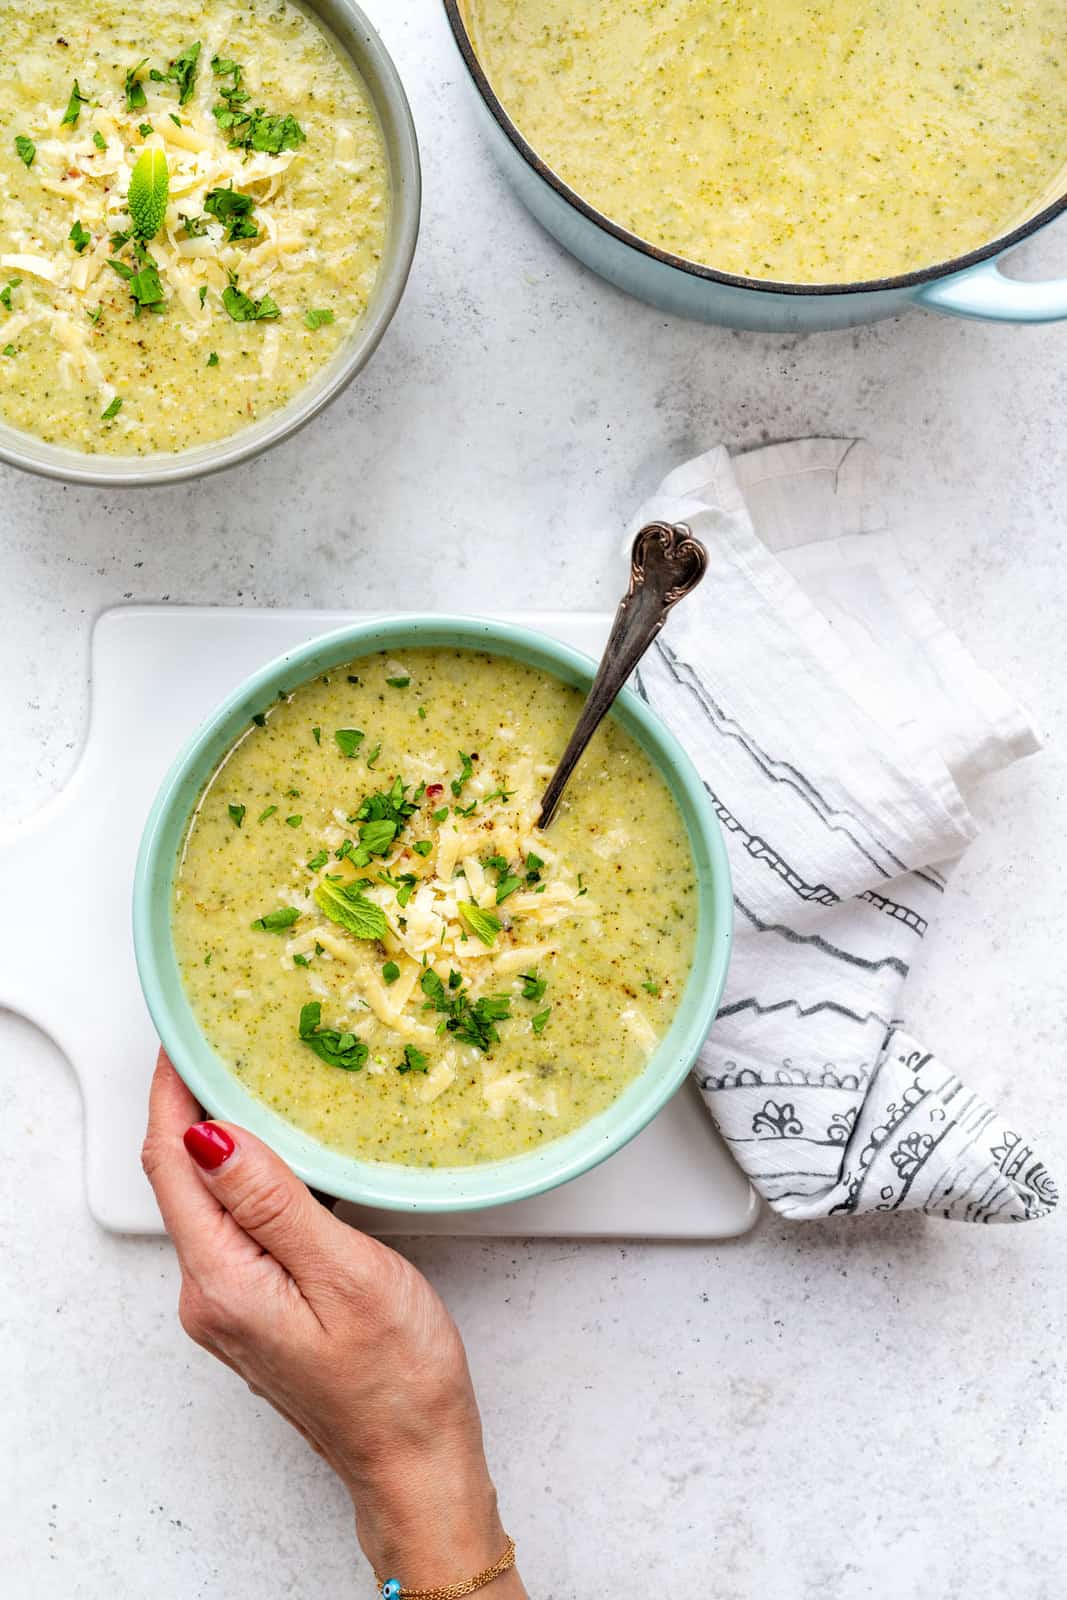 Bowl of creamy broccoli soup with grated cheddar and herb garnish